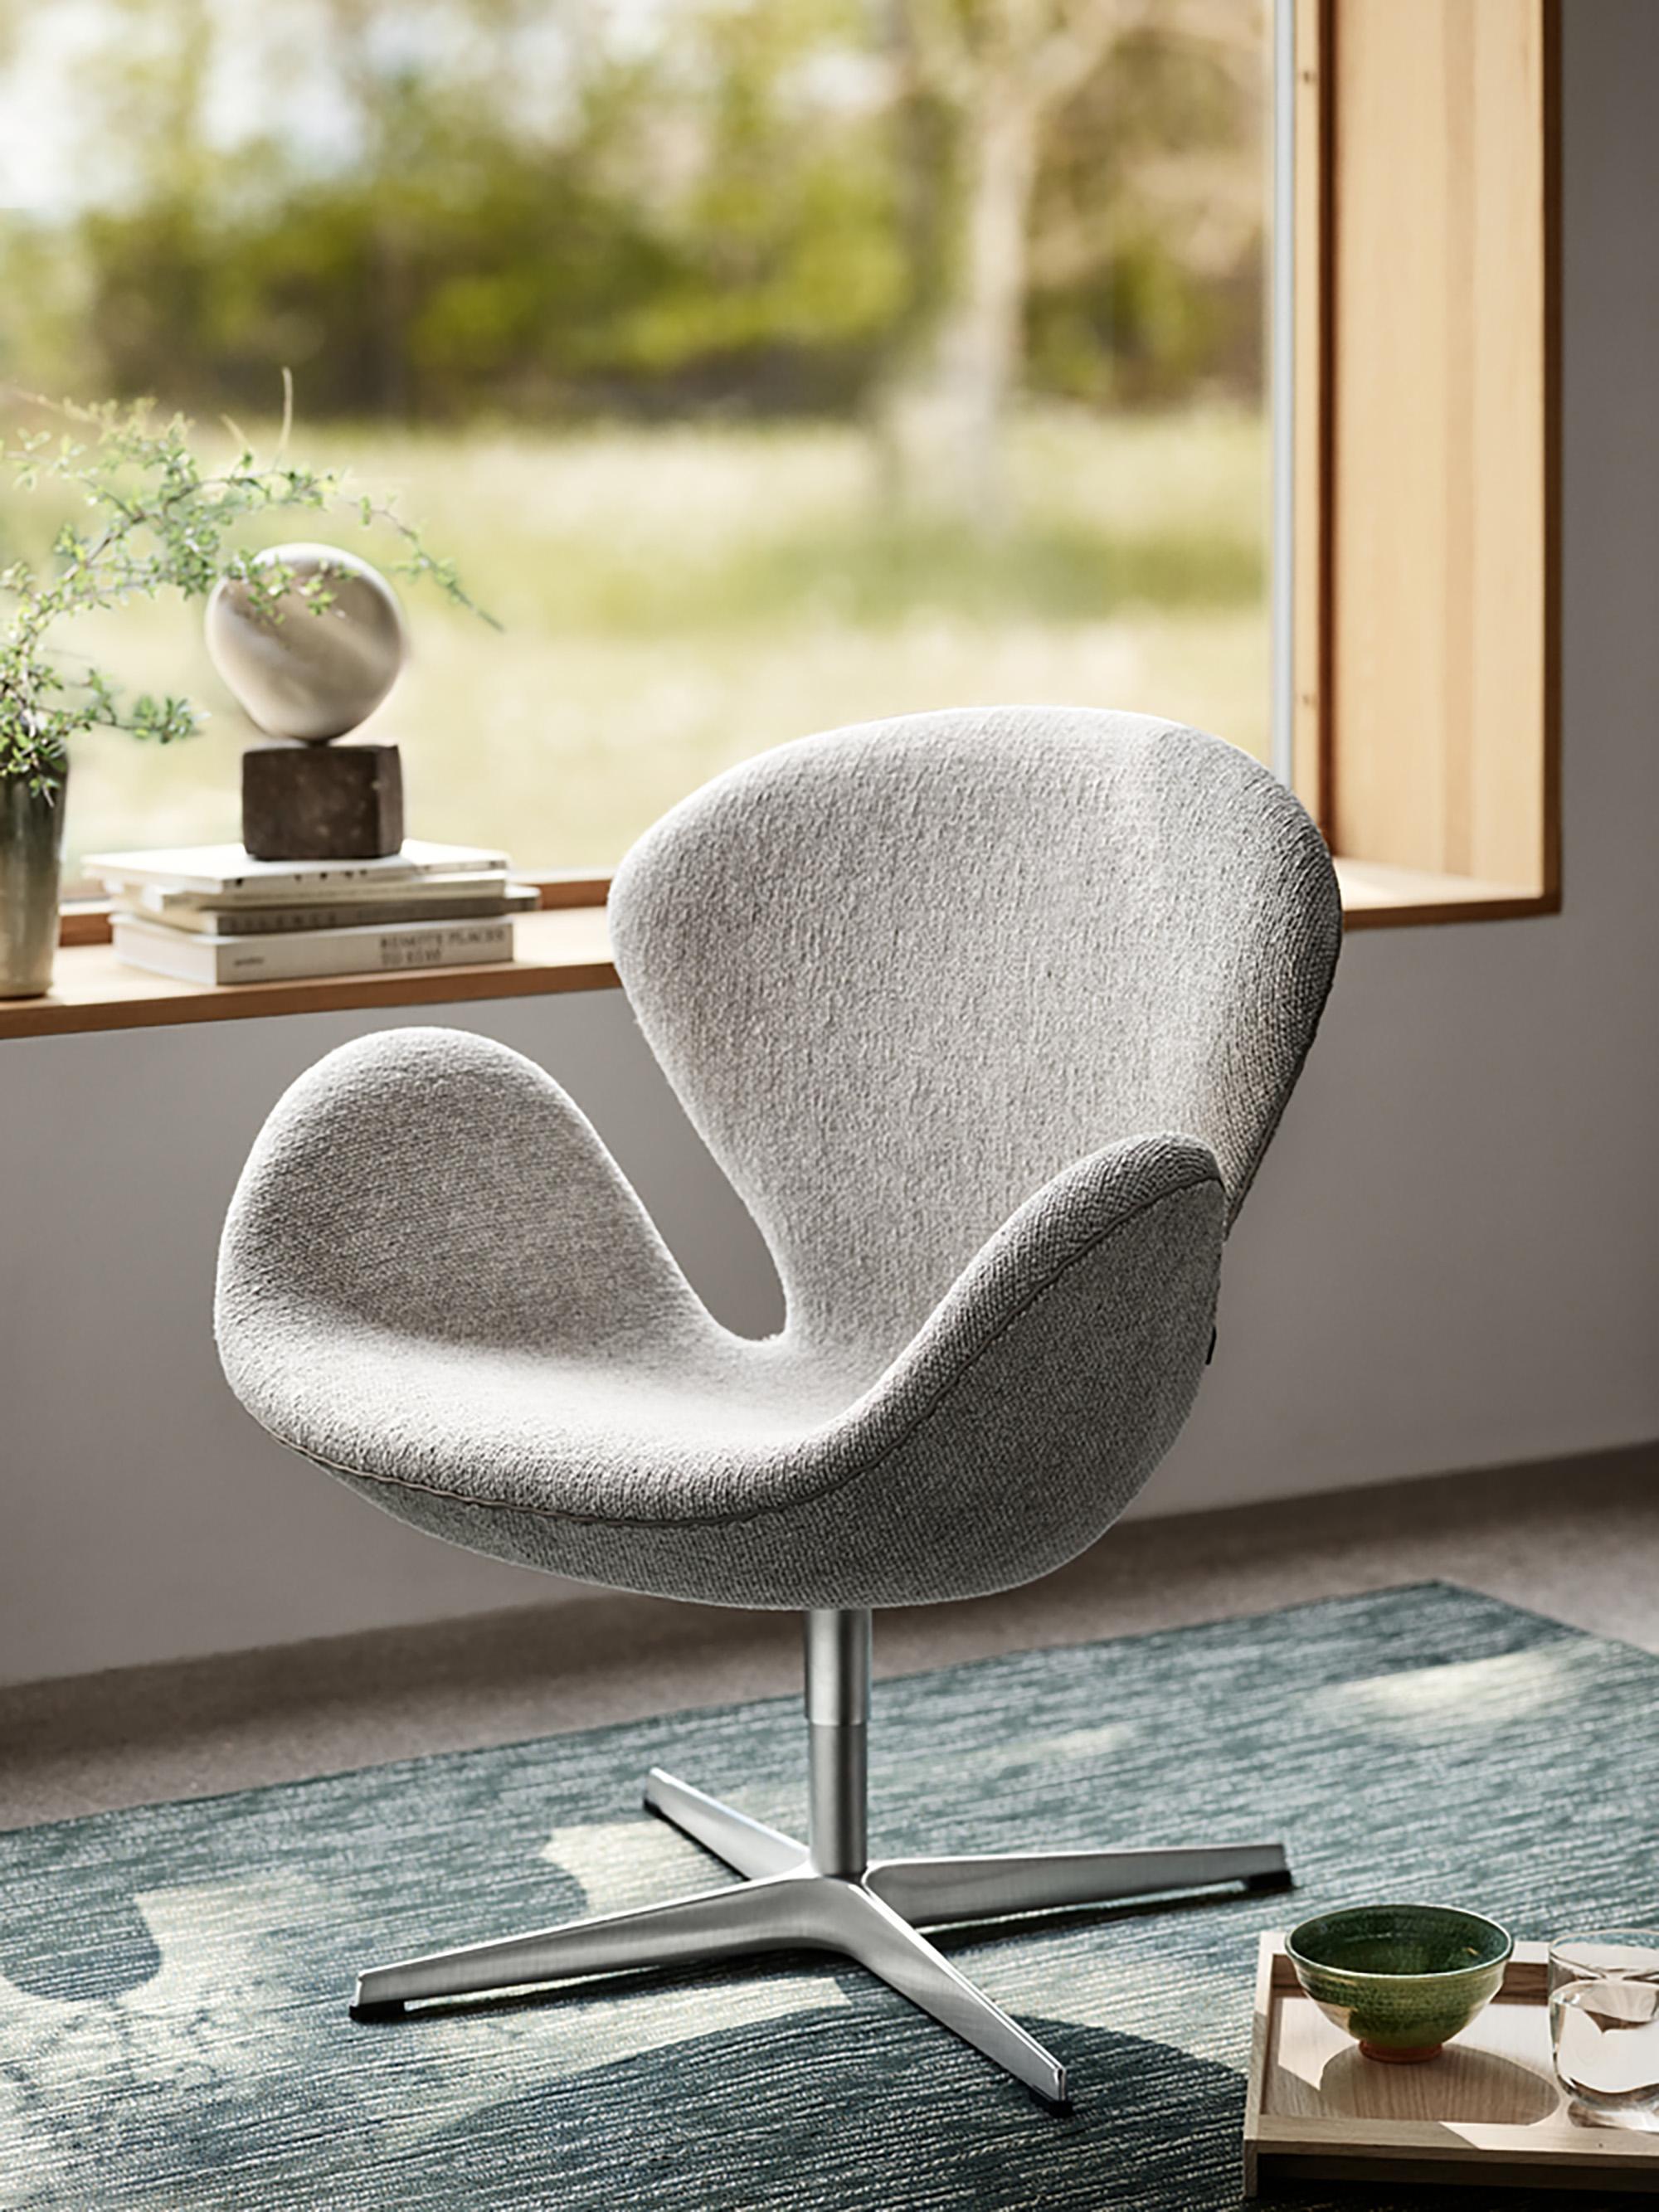 Arne Jacobsen 'Swan' Chair for Fritz Hansen in Fabric Upholstery (Cat. 2).

Established in 1872, Fritz Hansen has become synonymous with legendary Danish design. Combining timeless craftsmanship with an emphasis on sustainability, the brand’s